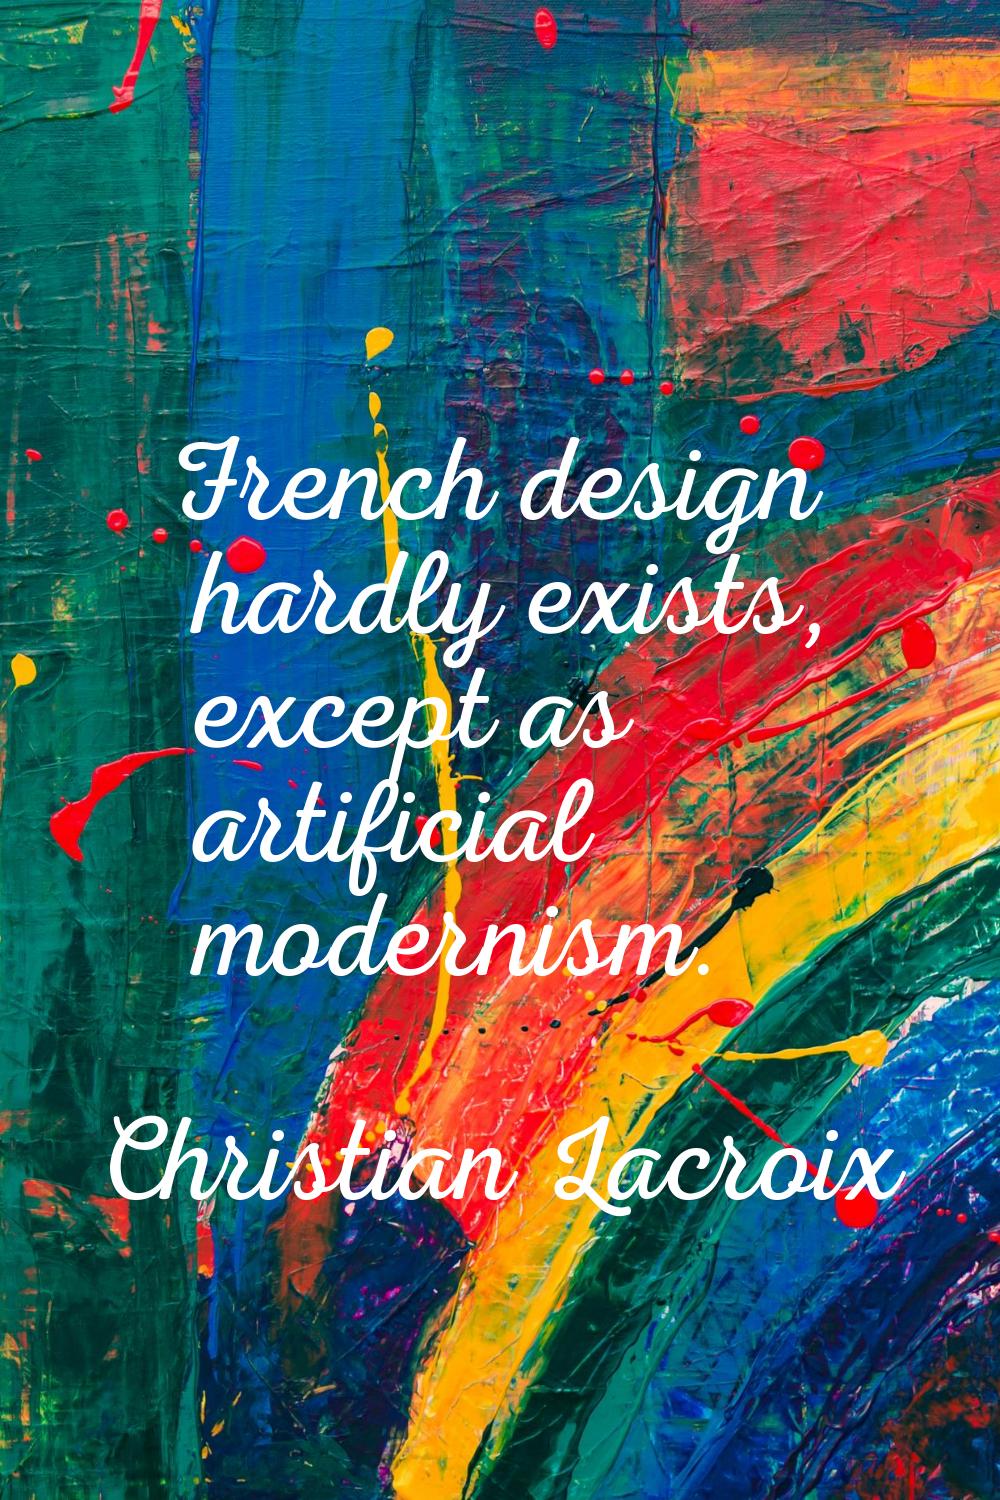 French design hardly exists, except as artificial modernism.